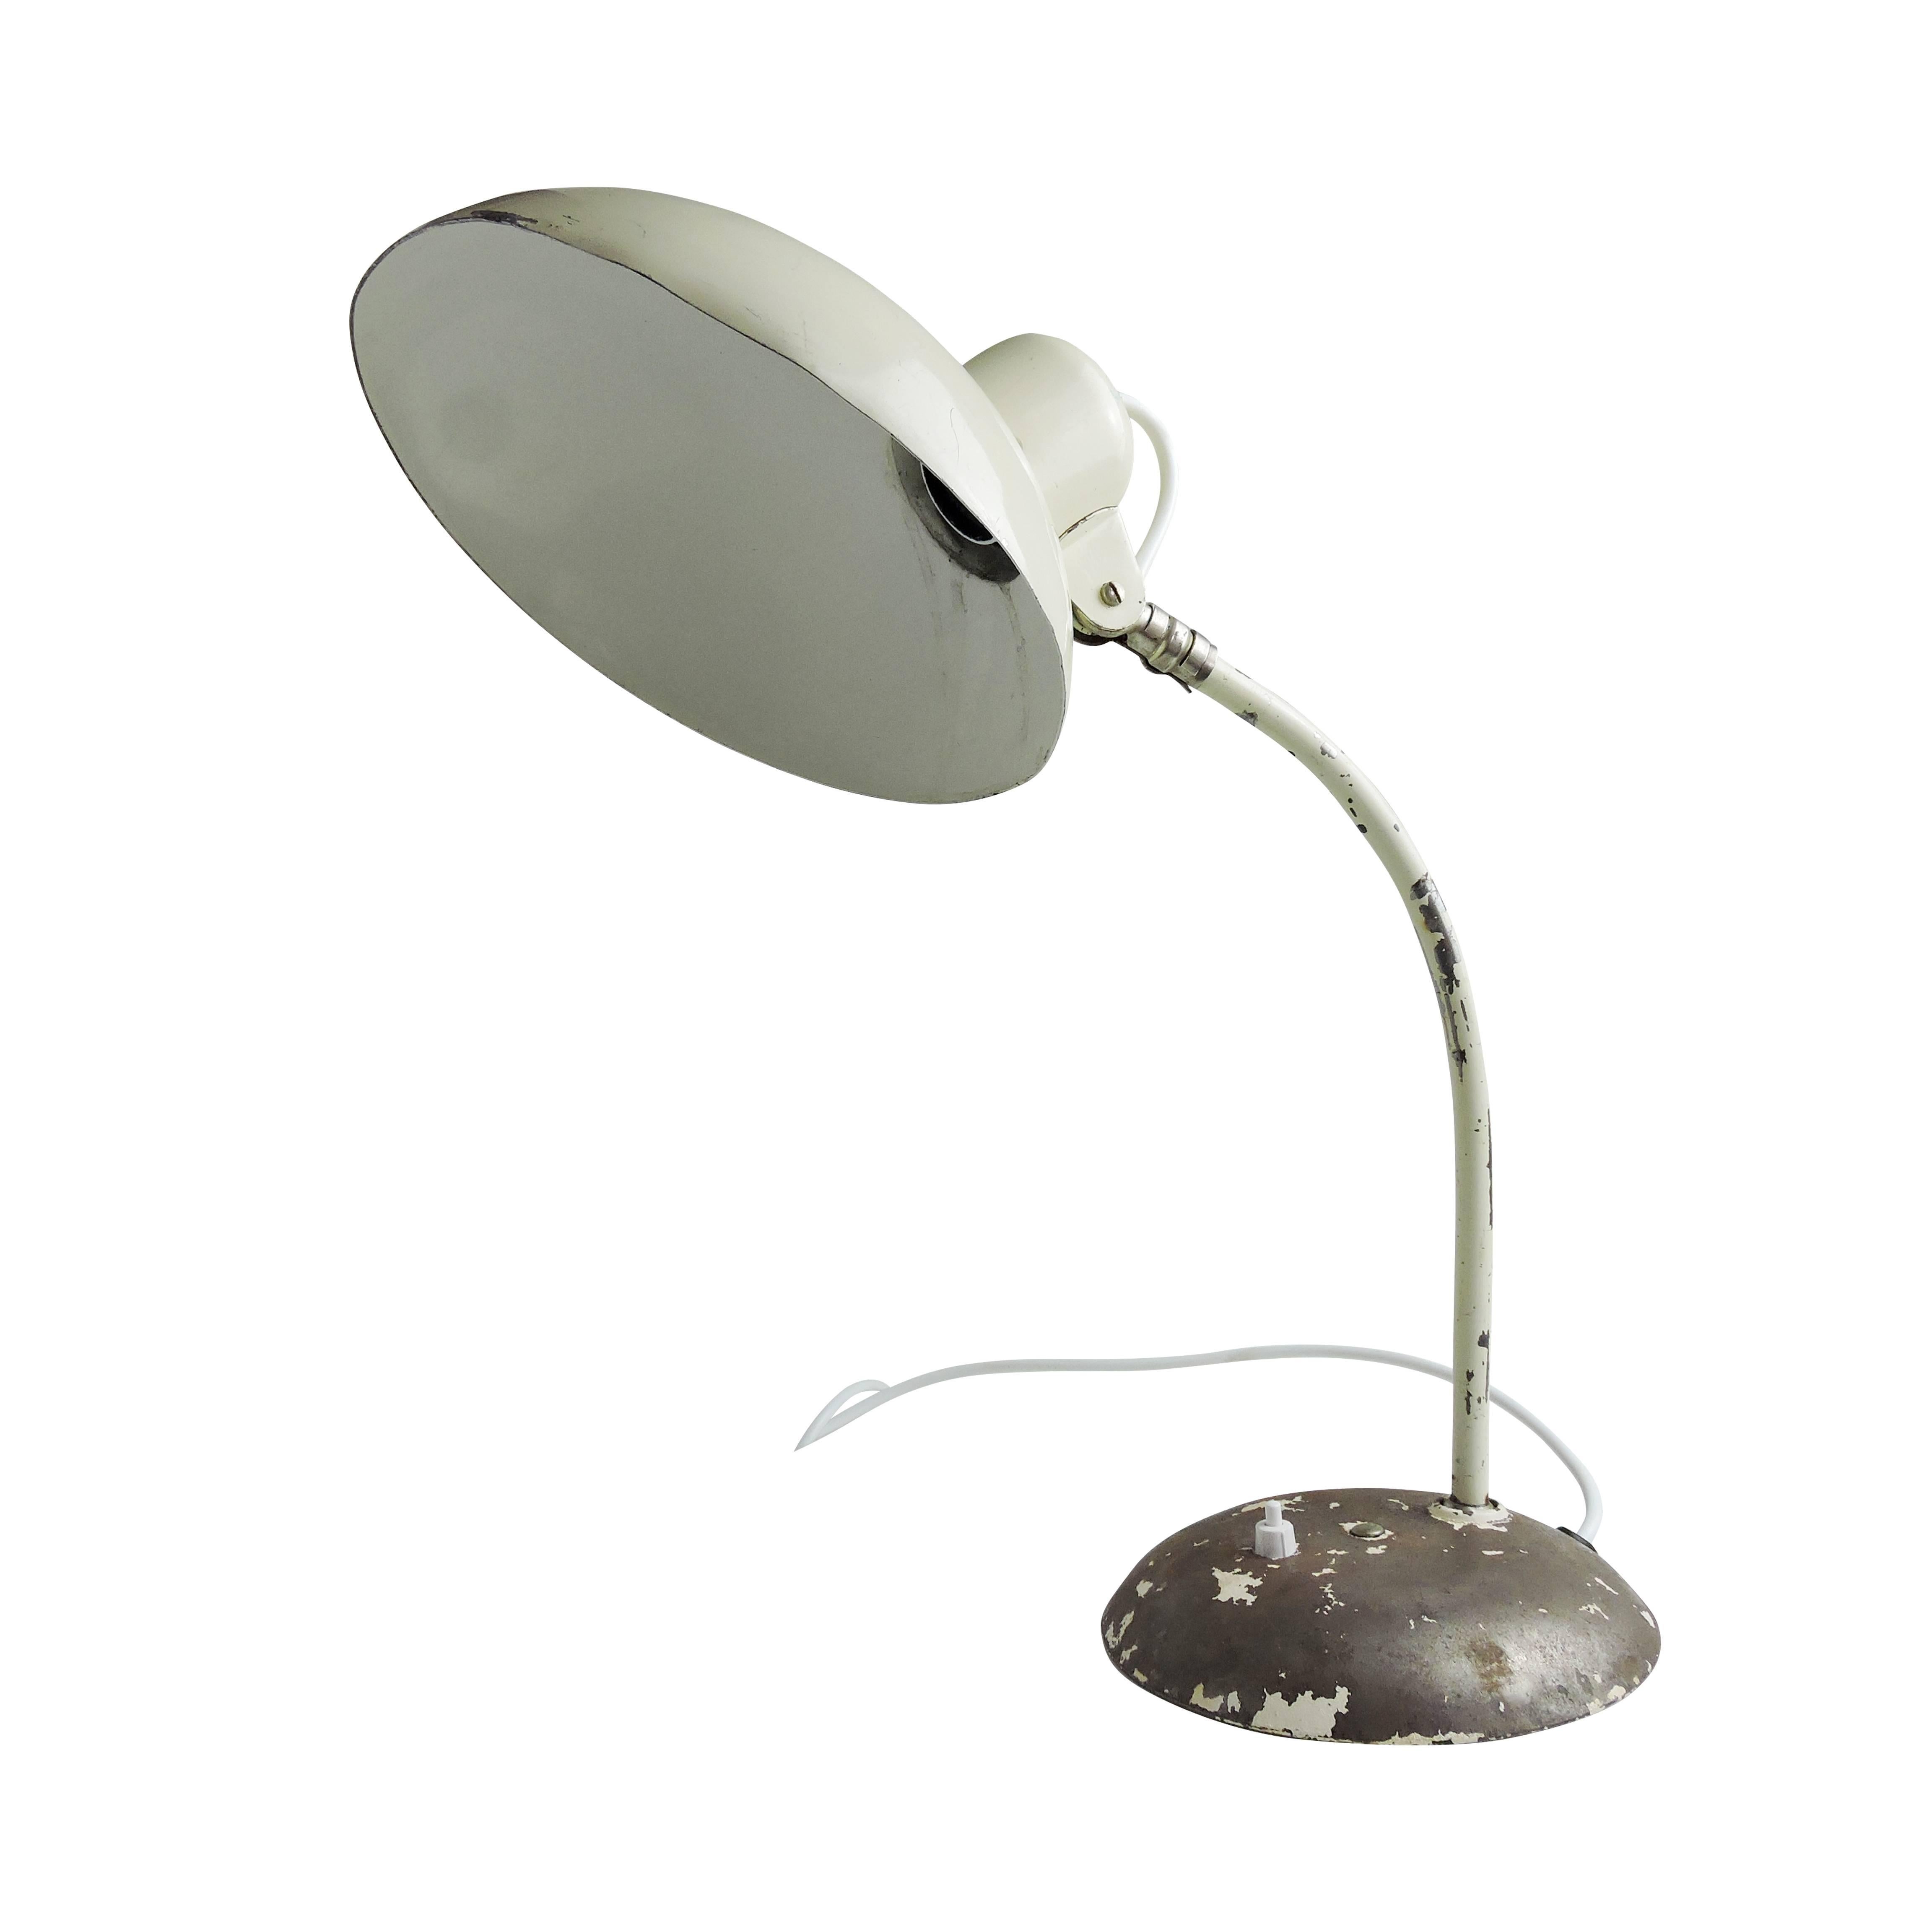 A midcentury table or desk lamp made in Portugal.